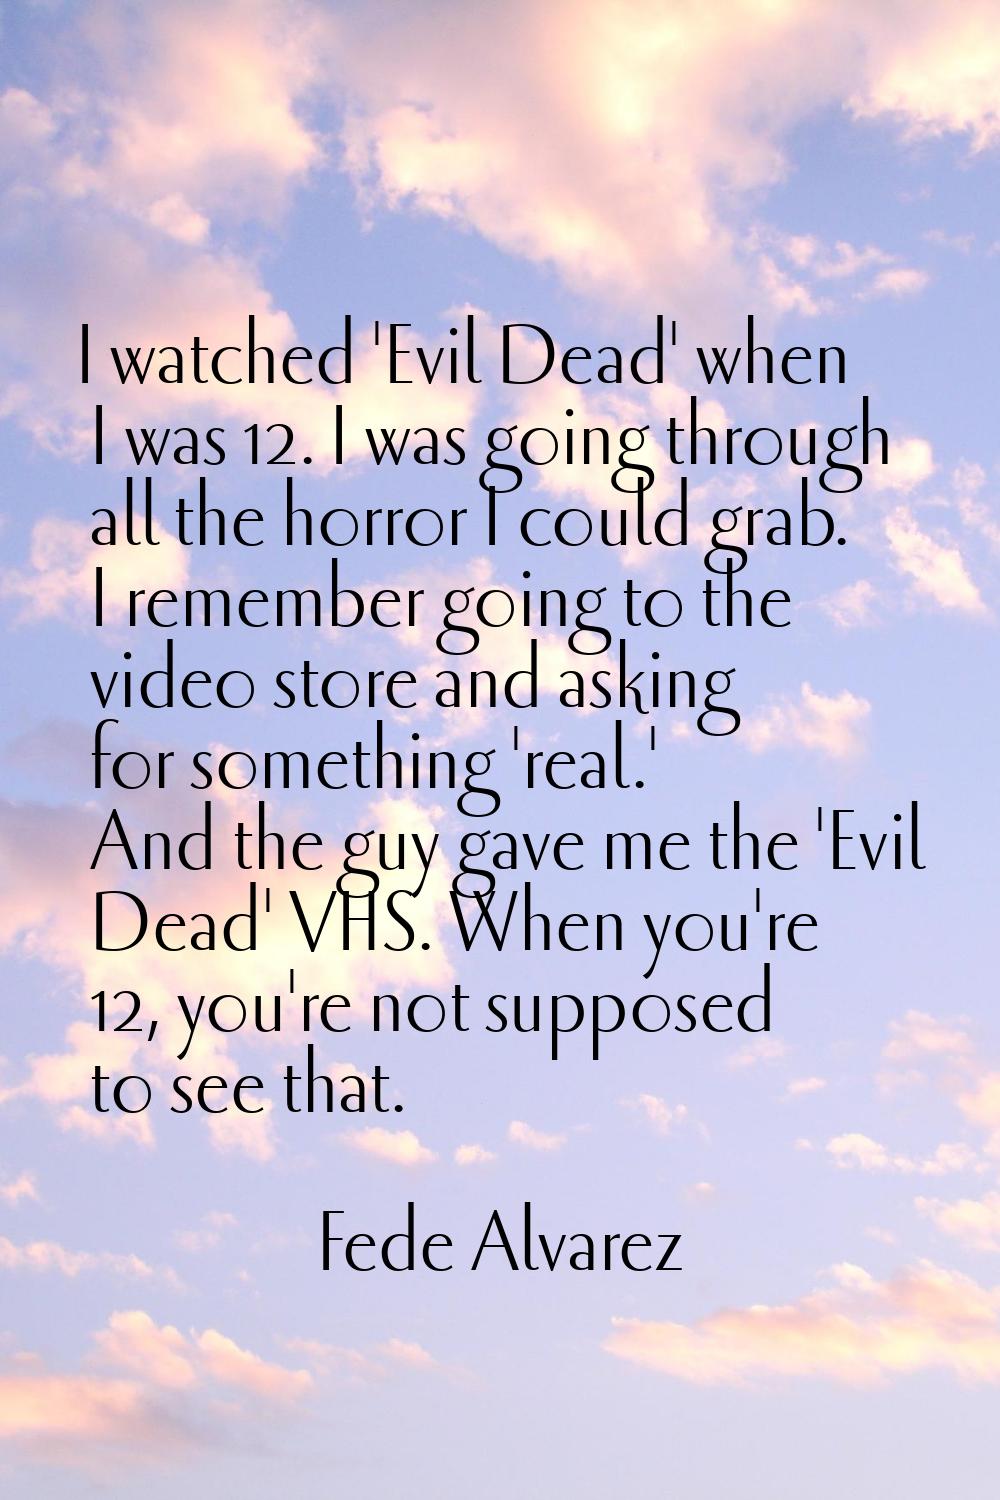 I watched 'Evil Dead' when I was 12. I was going through all the horror I could grab. I remember go